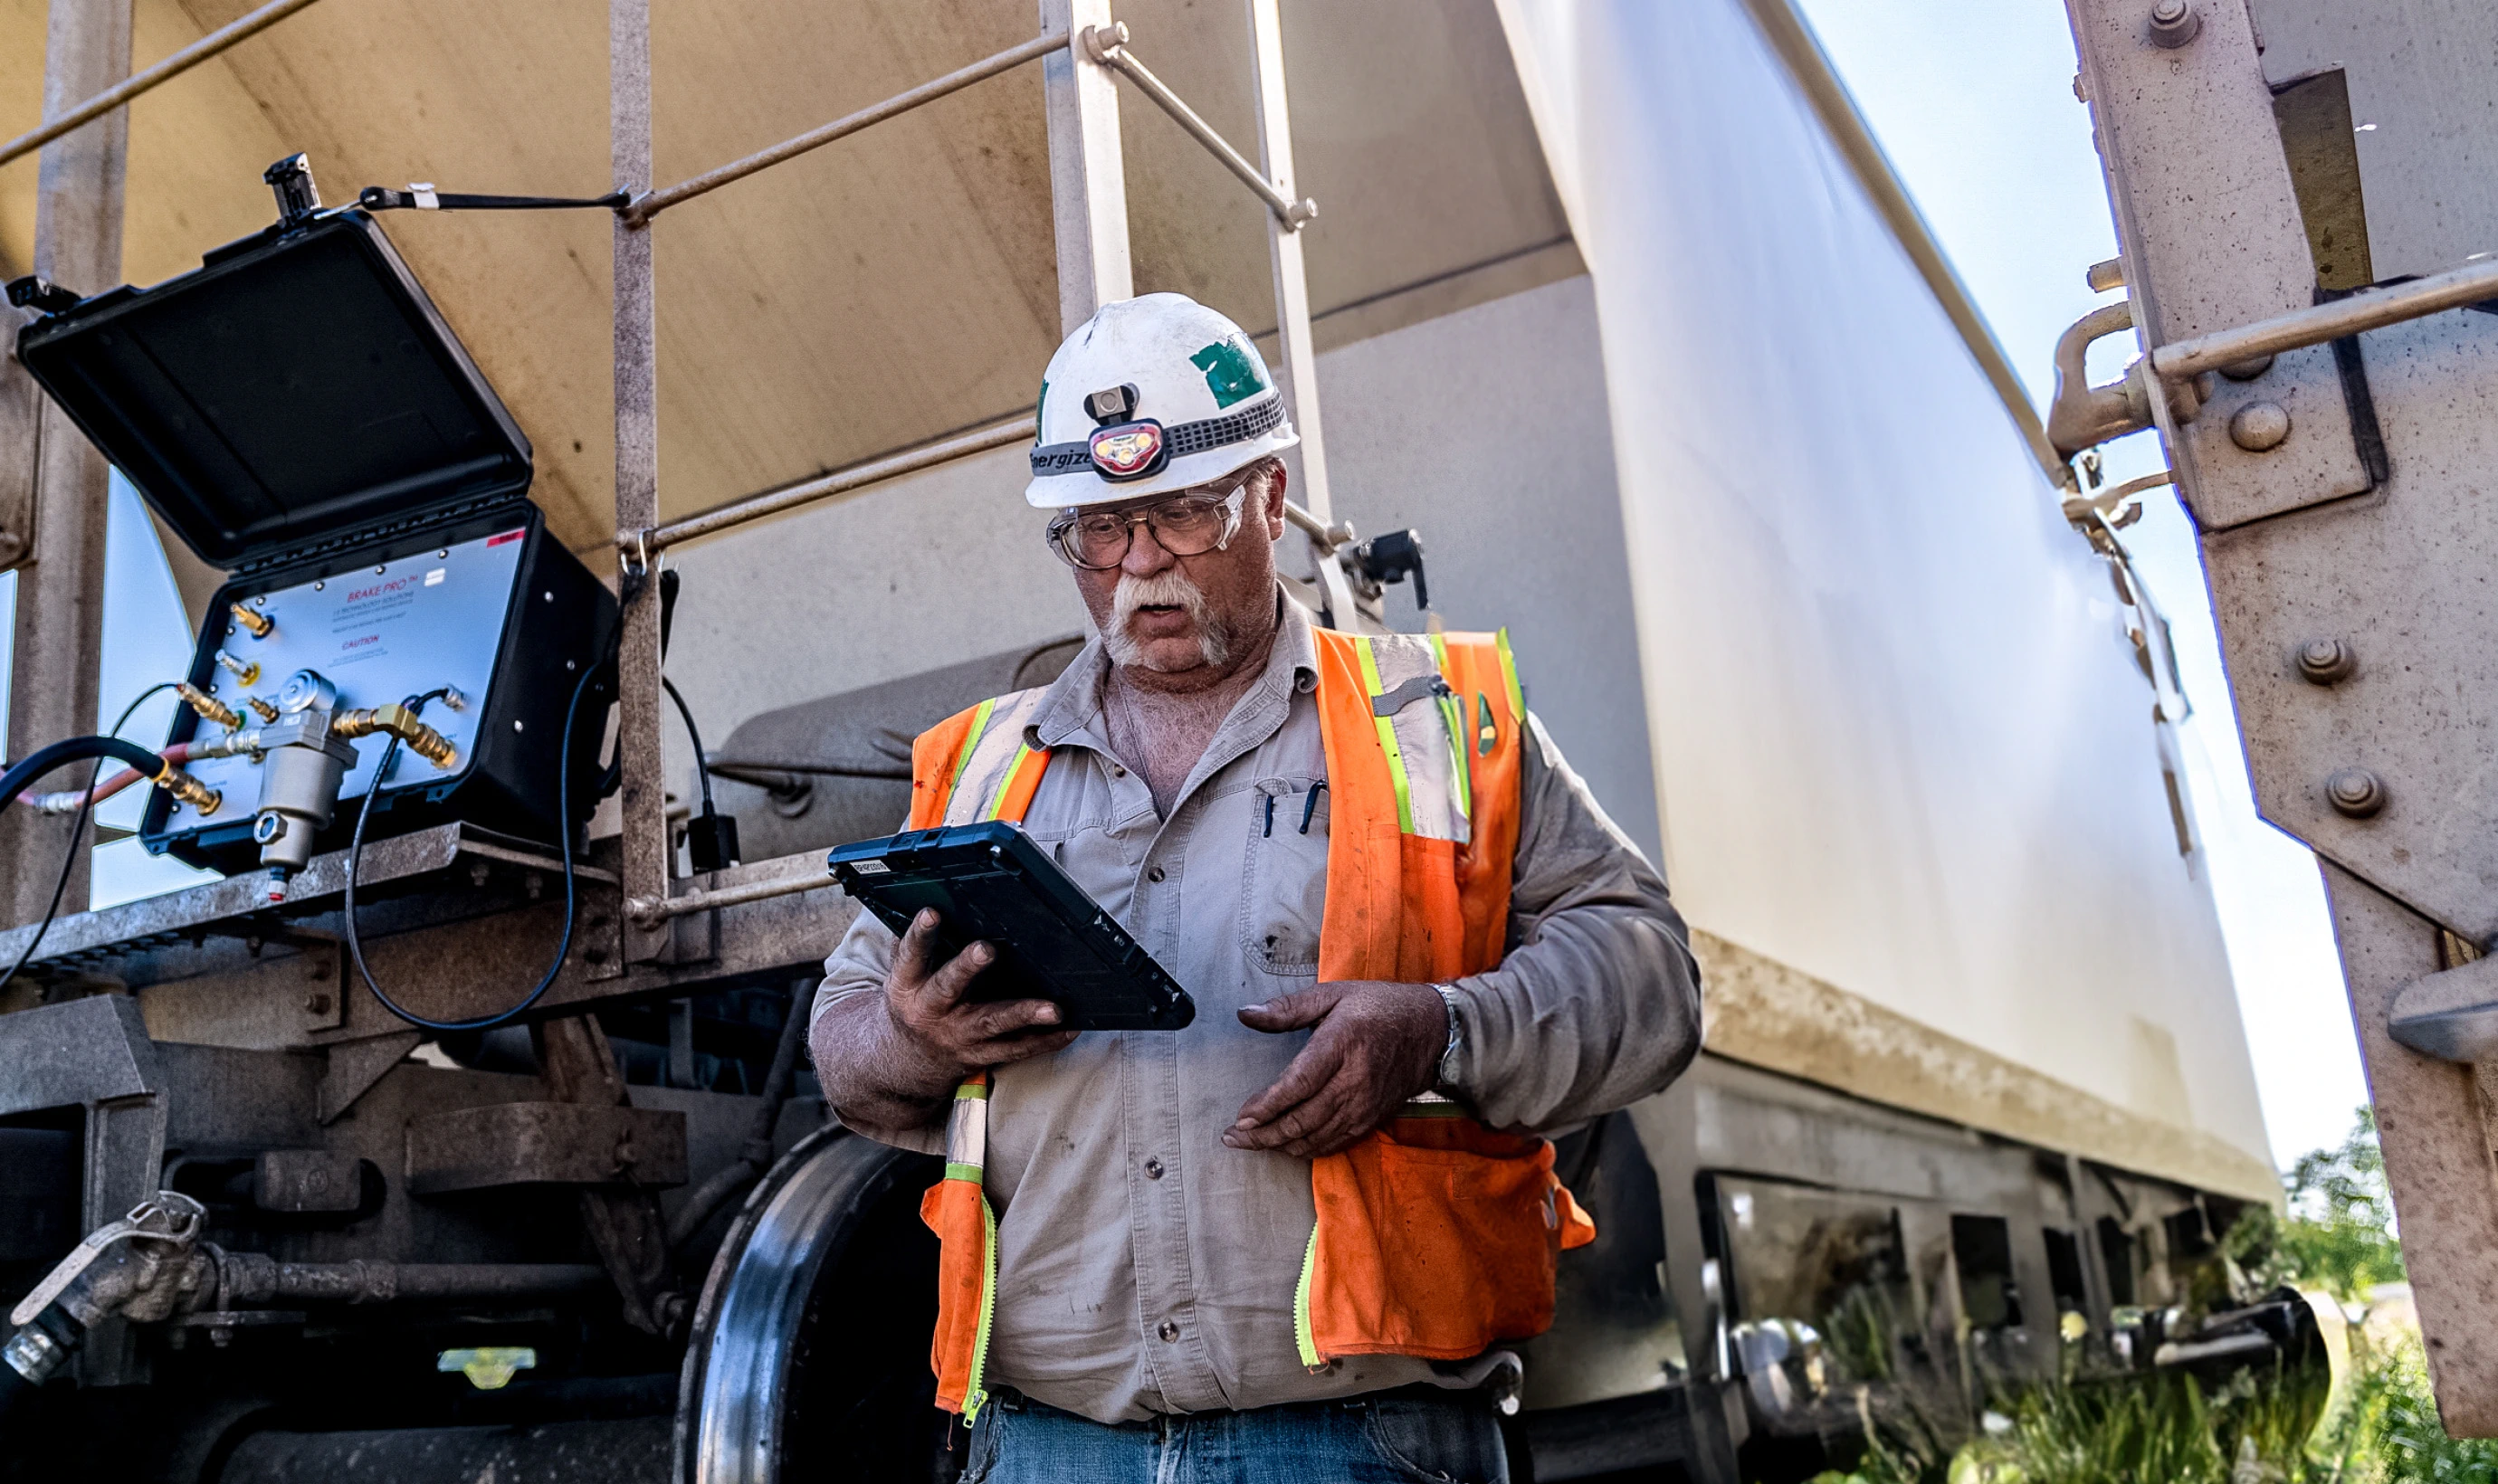 pattison Sand worker in hardhat standing in front of railcar looking at tablet